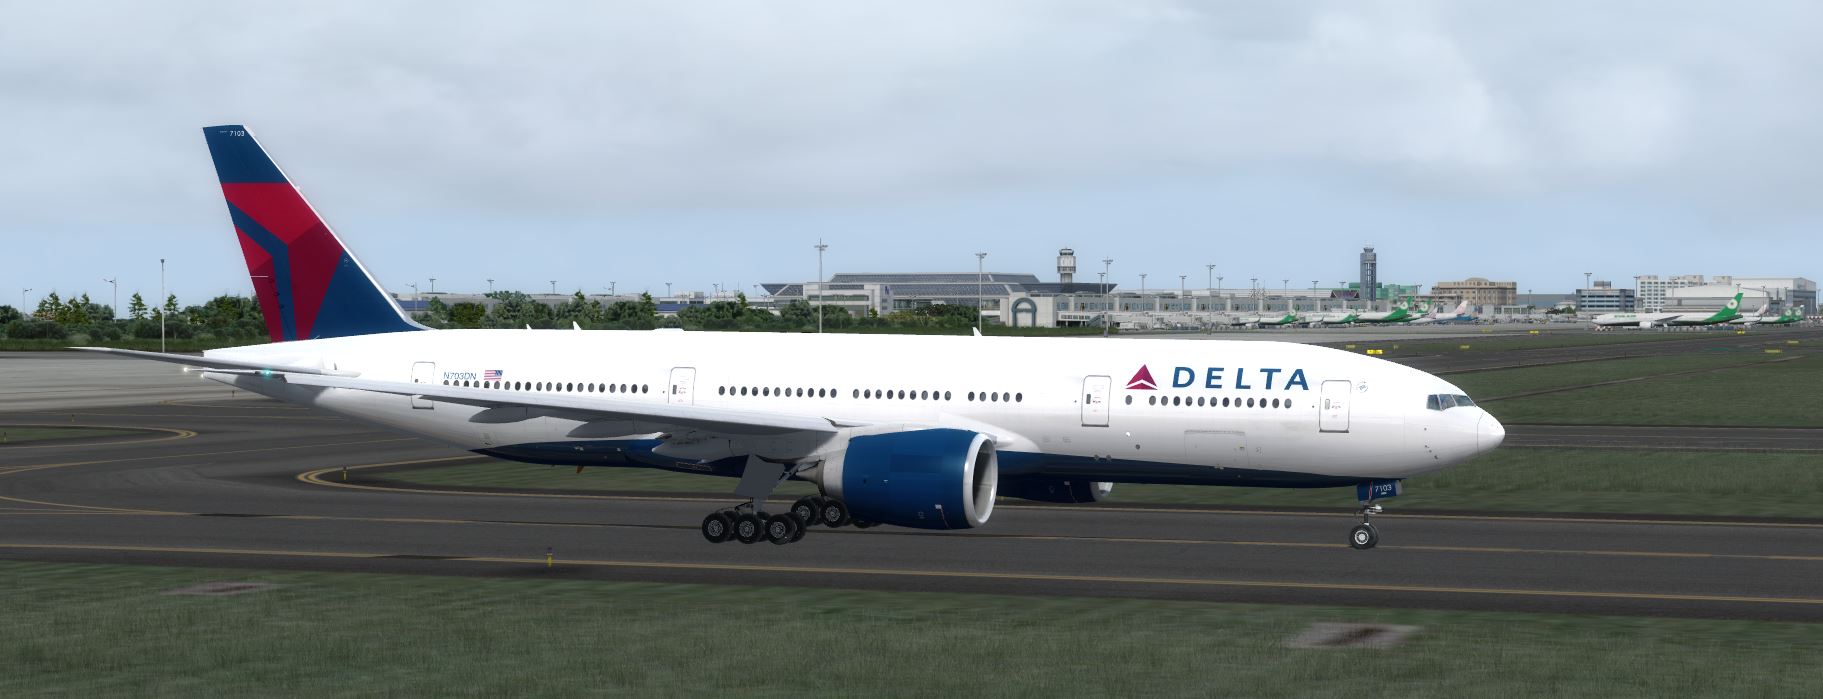 B777-200 Delta Airlines Standard Livery-6693 